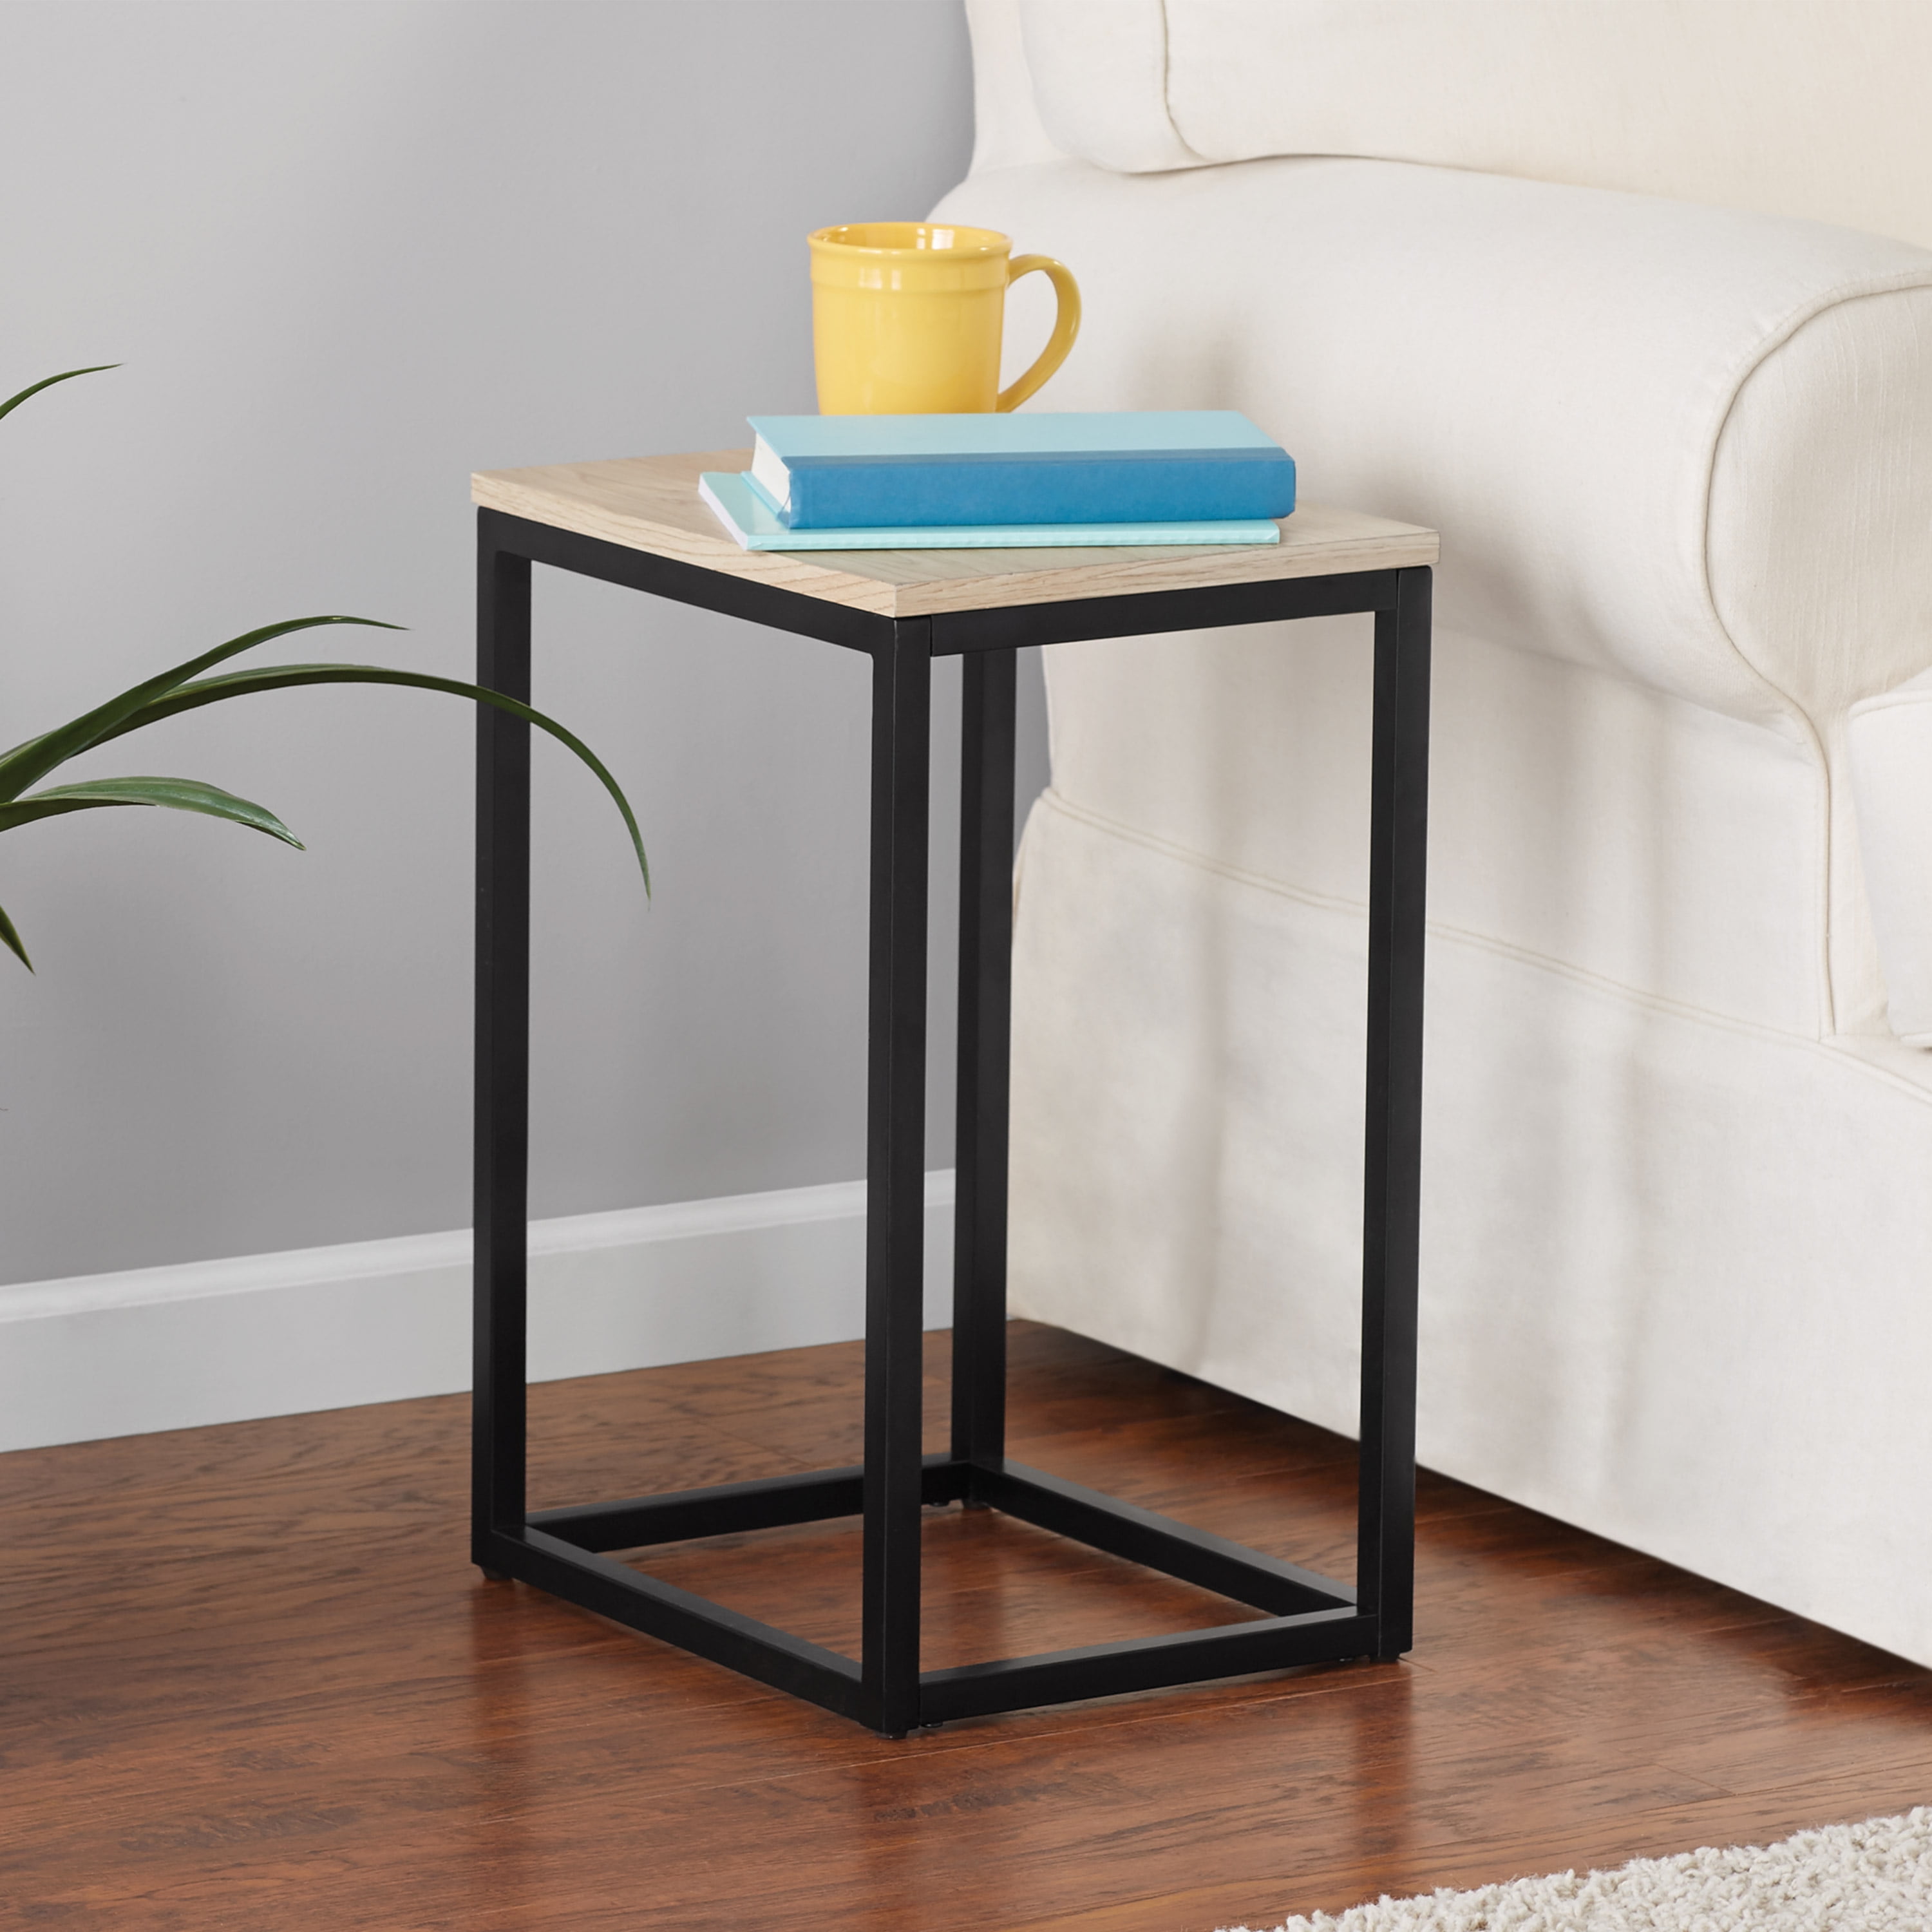 Mainstays Rectangle End Table, Natural Finish Top with Black Frame - Walmart.com